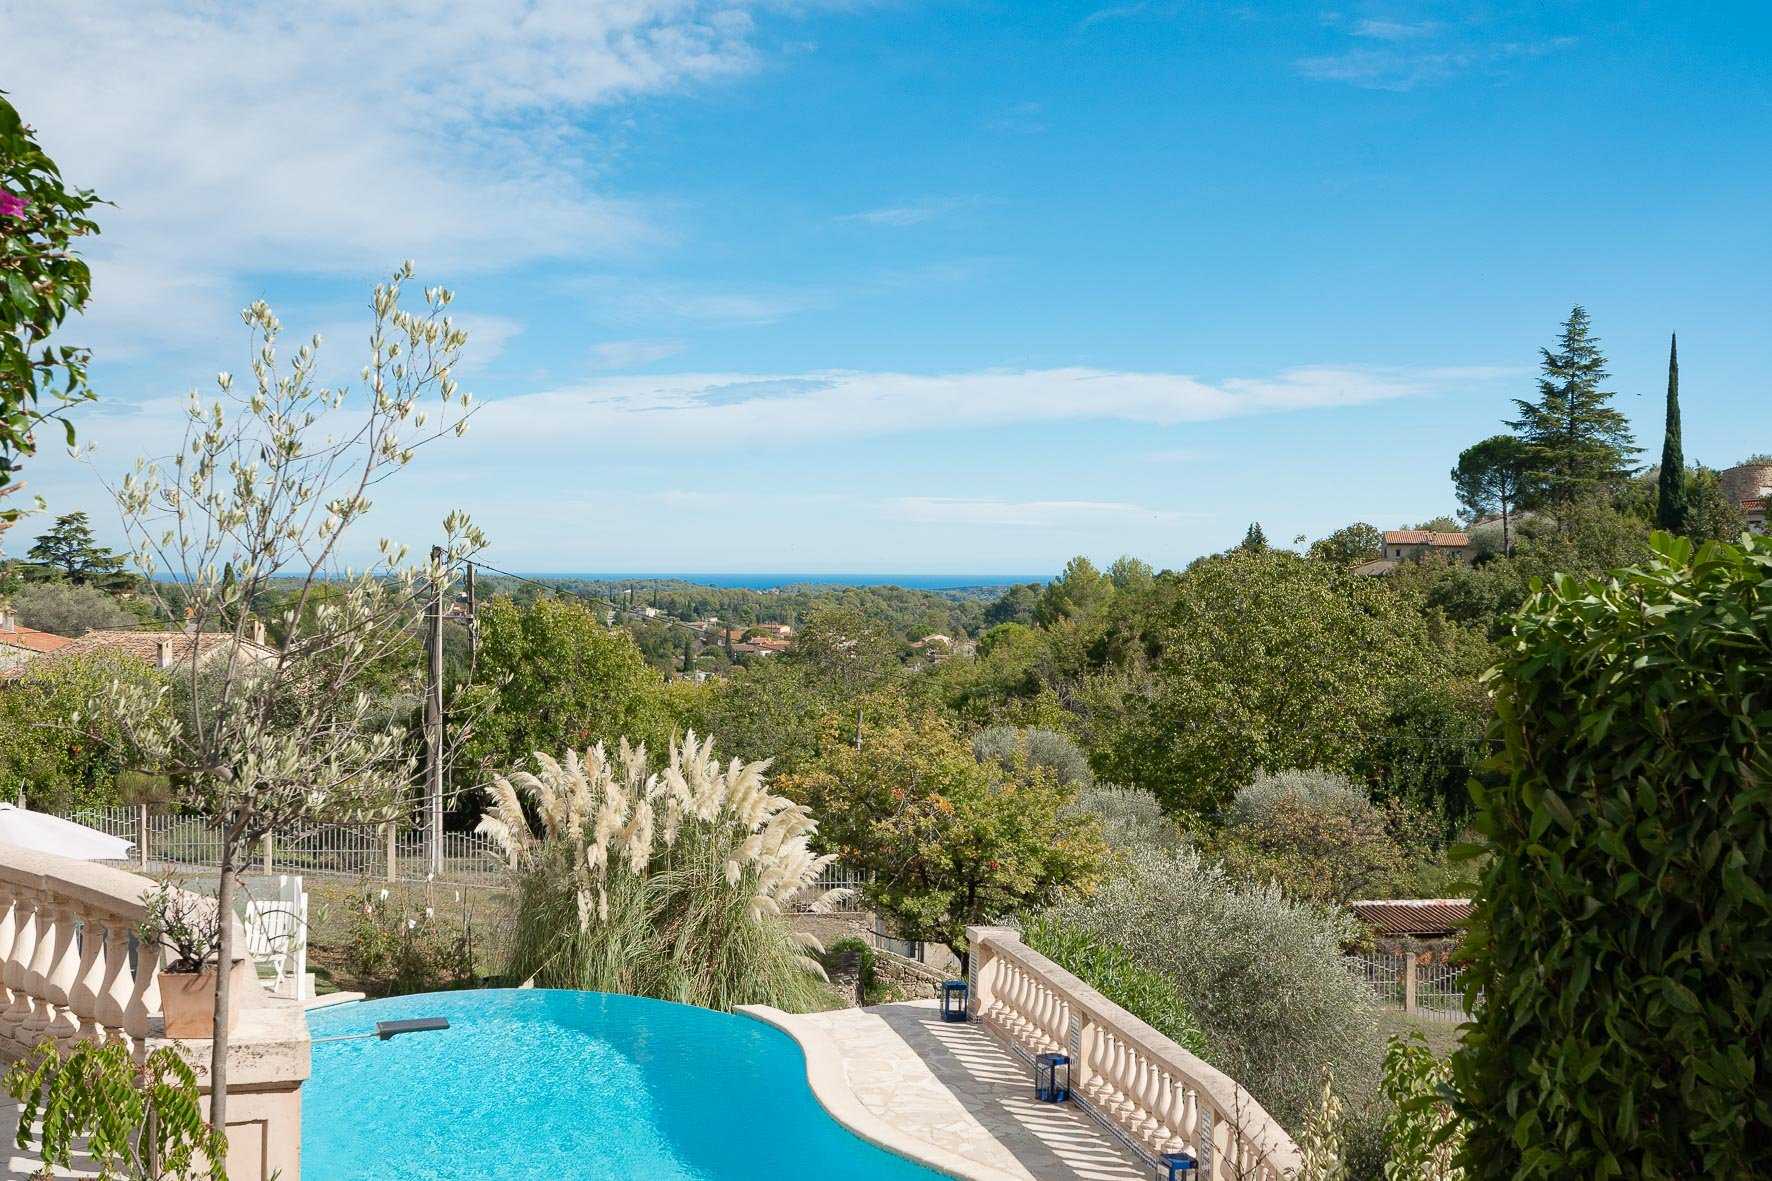 Other in Mazan, Provence-Alpes-Cote d'Azur 11616856